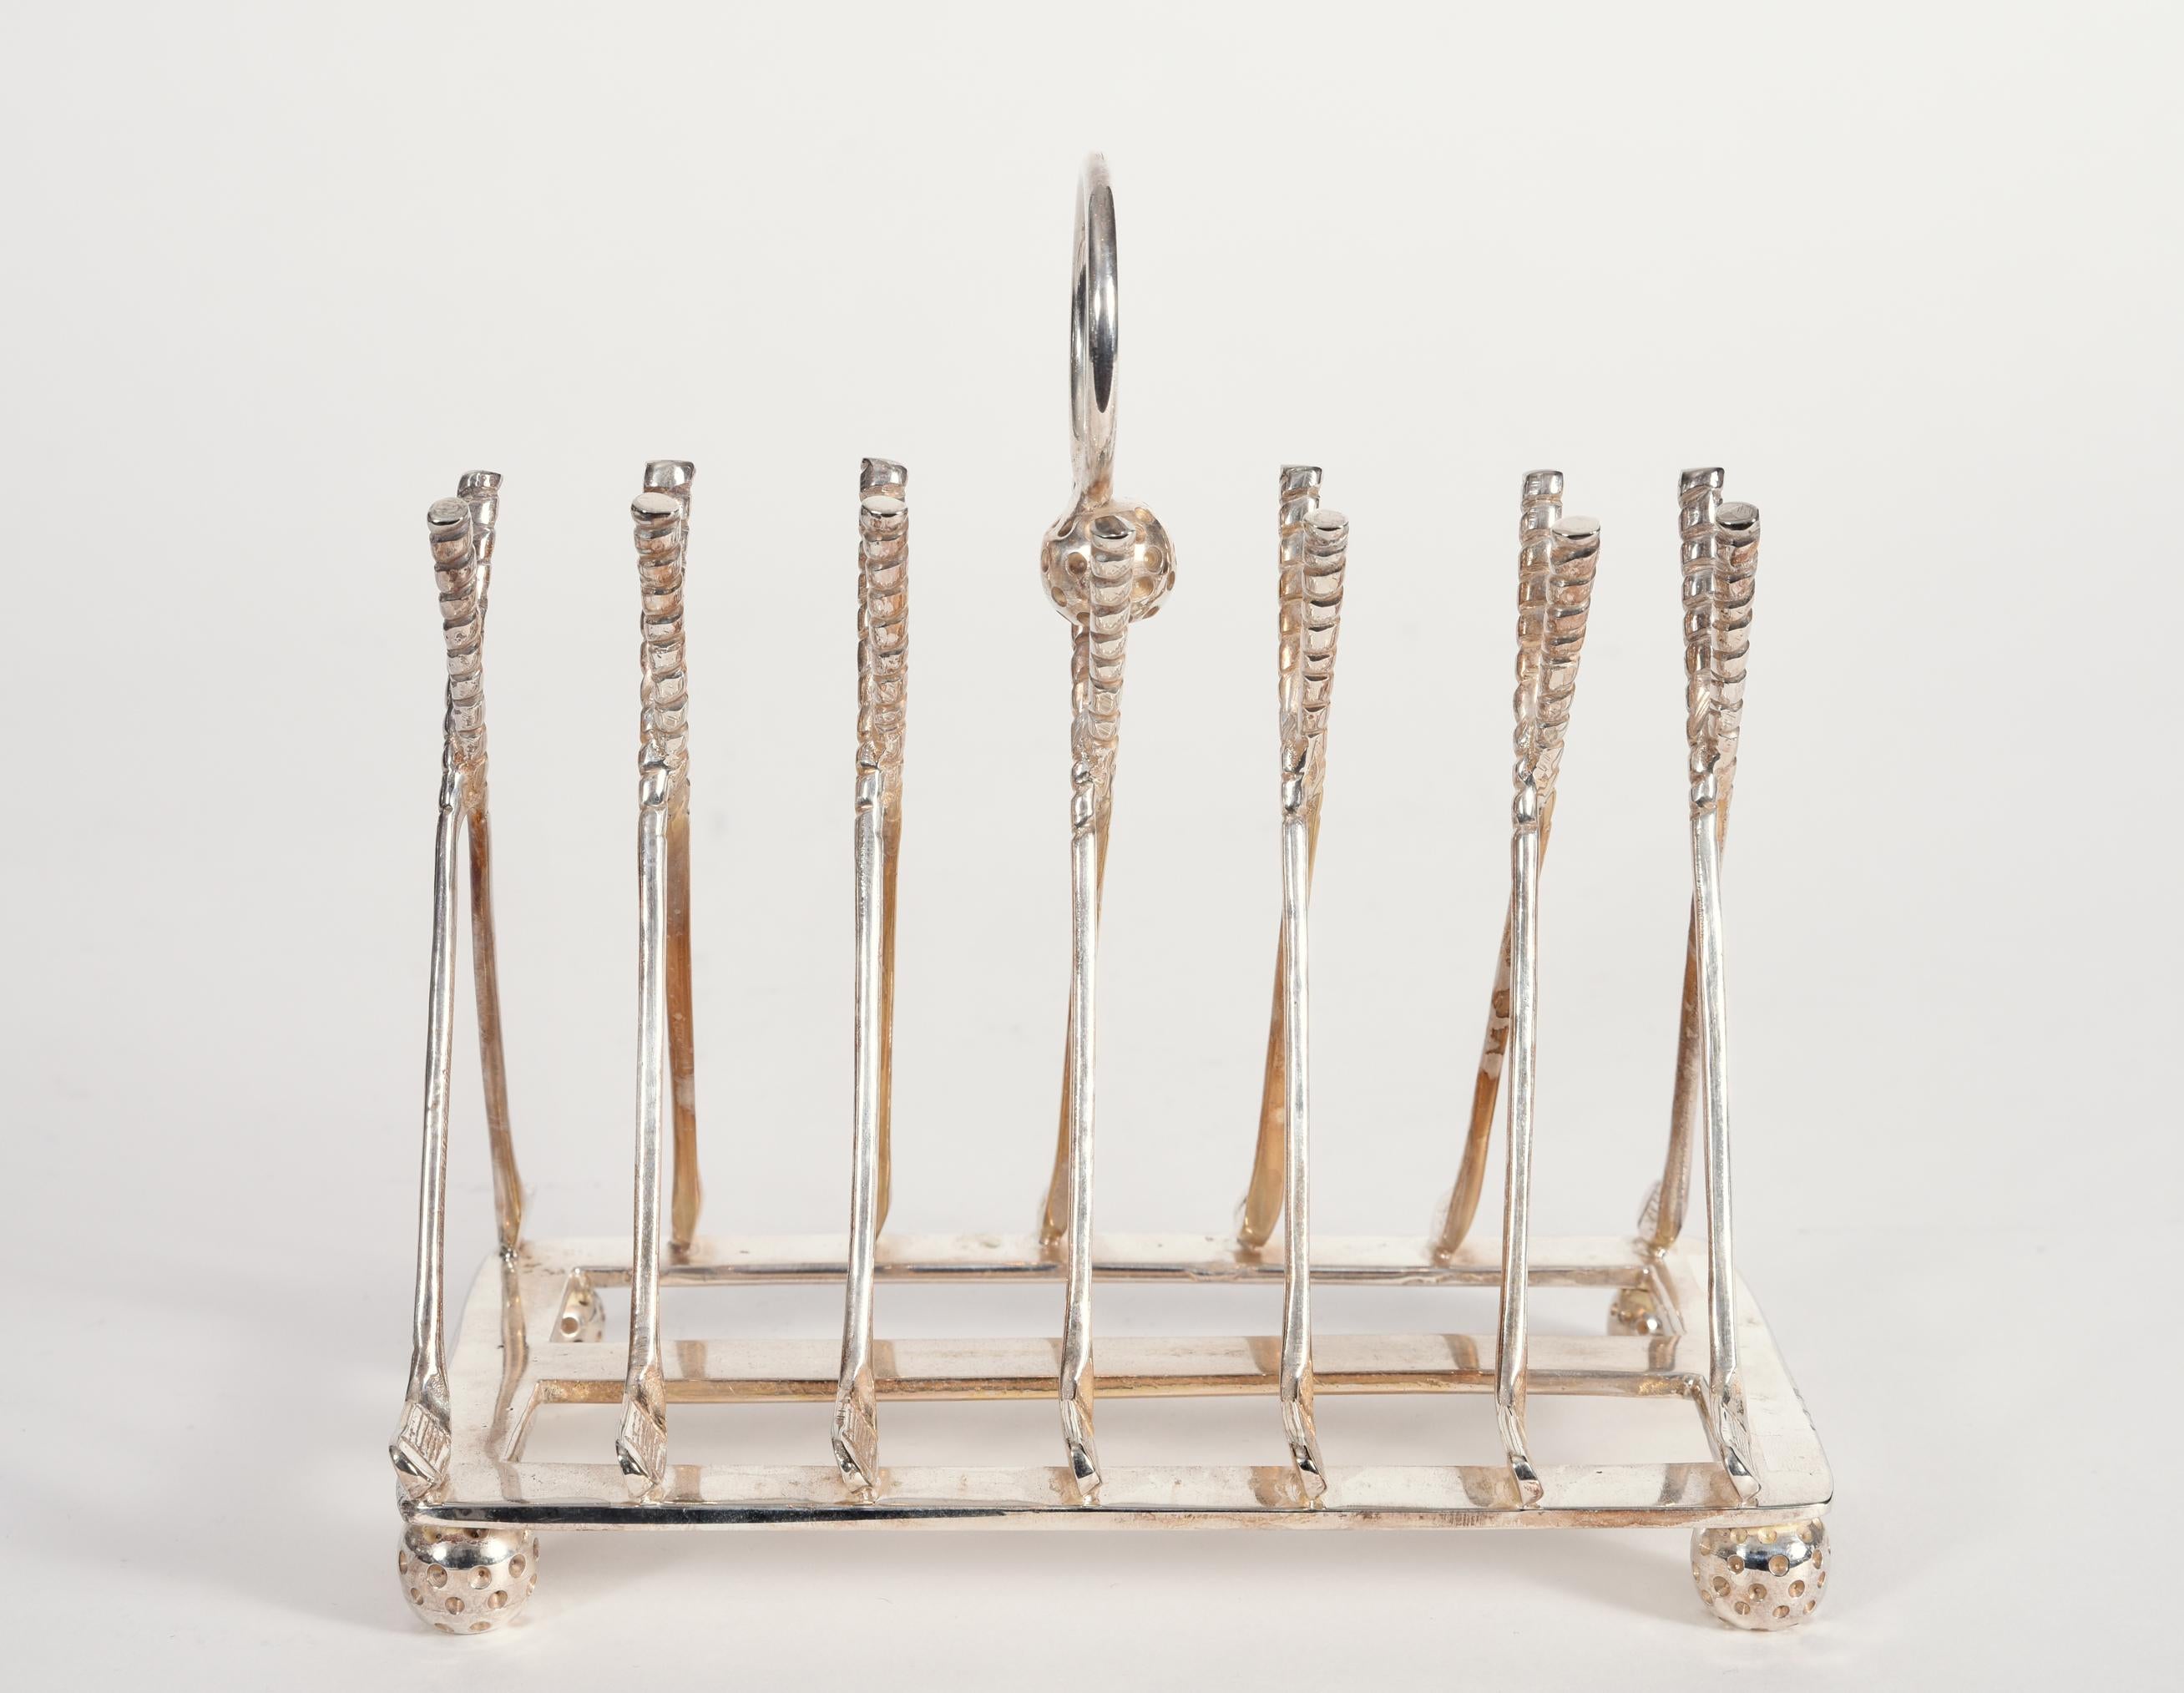 Vintage English silver plated or copper golf sport design details tableware toast rack. The piece is excellent condition, maker's mark undersigned. The toast rack measure about 6.5 inches length x 4 inches width x 6 inches high.